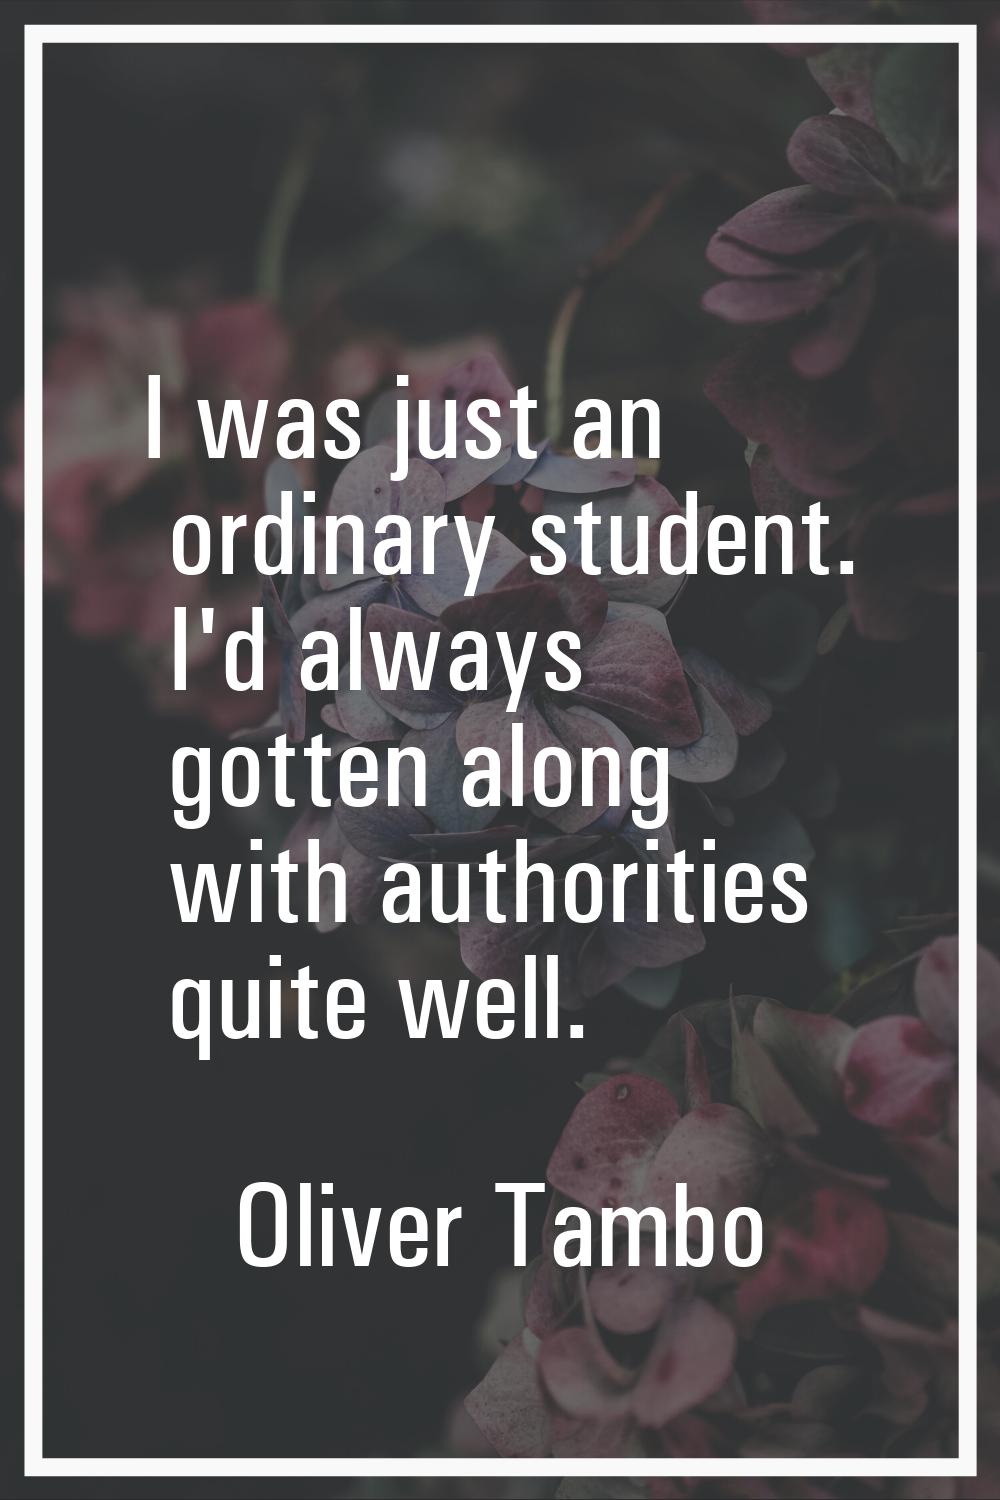 I was just an ordinary student. I'd always gotten along with authorities quite well.